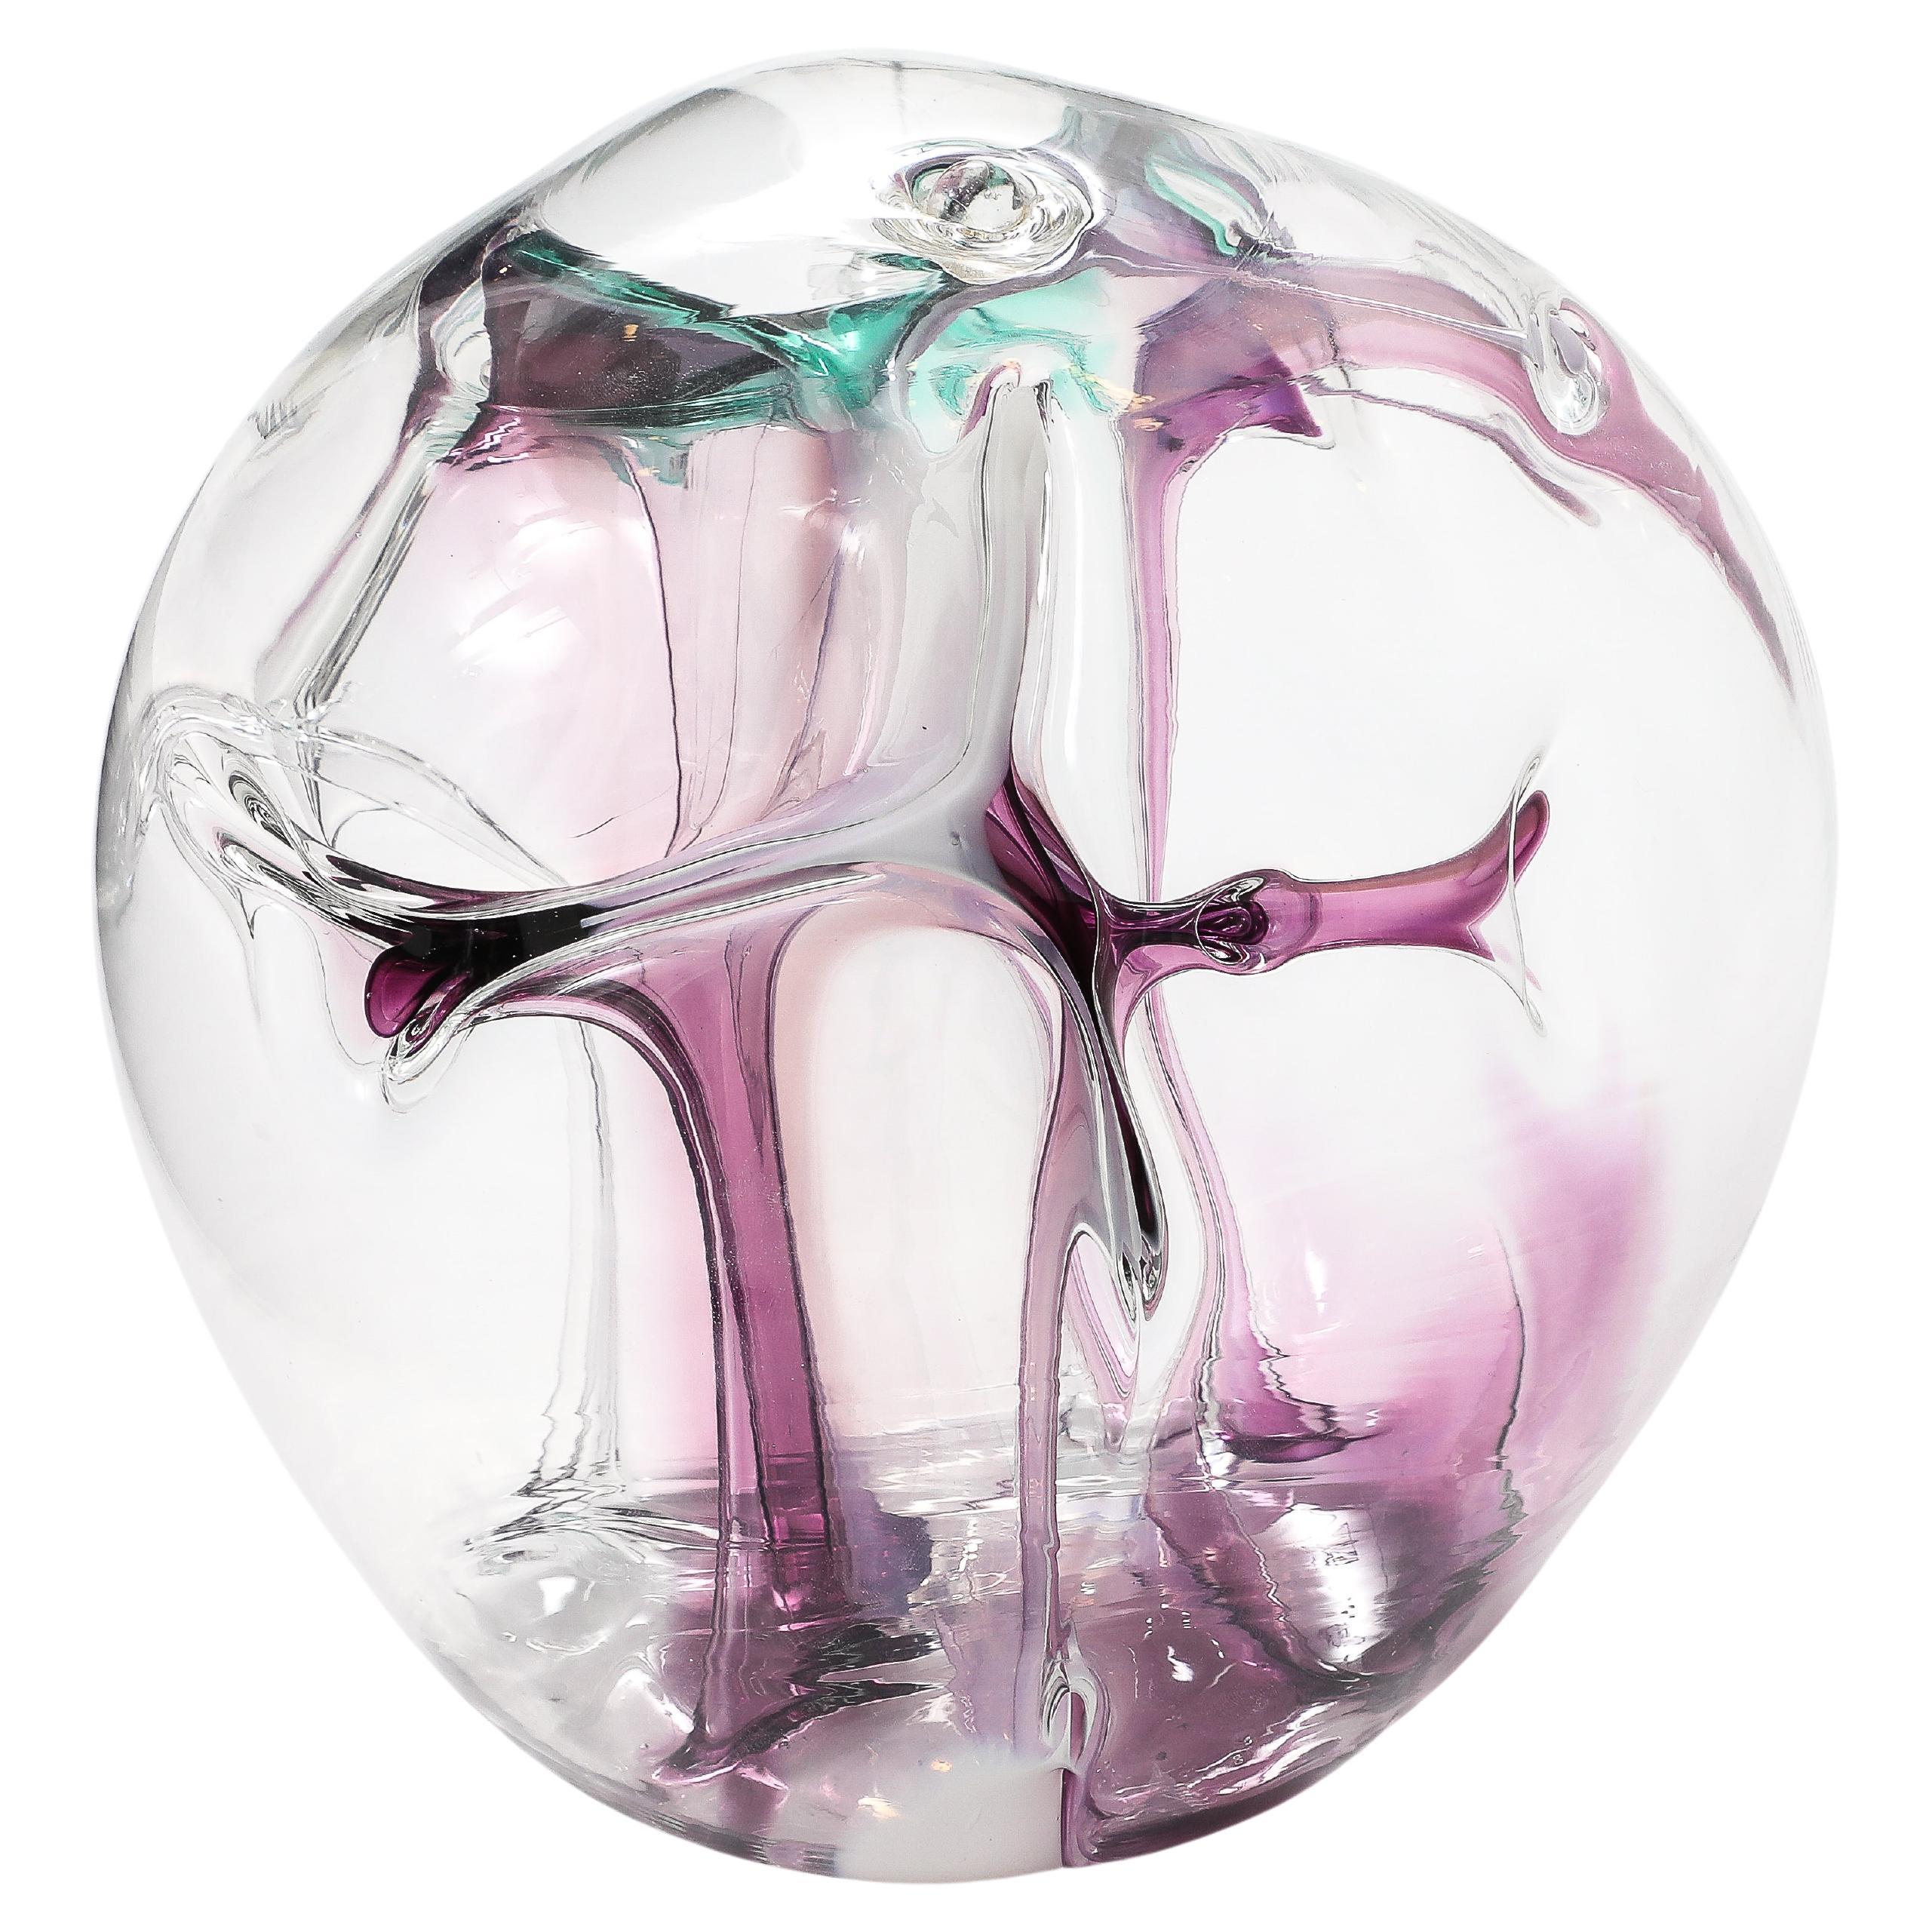 Peter Bramhall Glass Orb sculpture, Dated 1998. For Sale